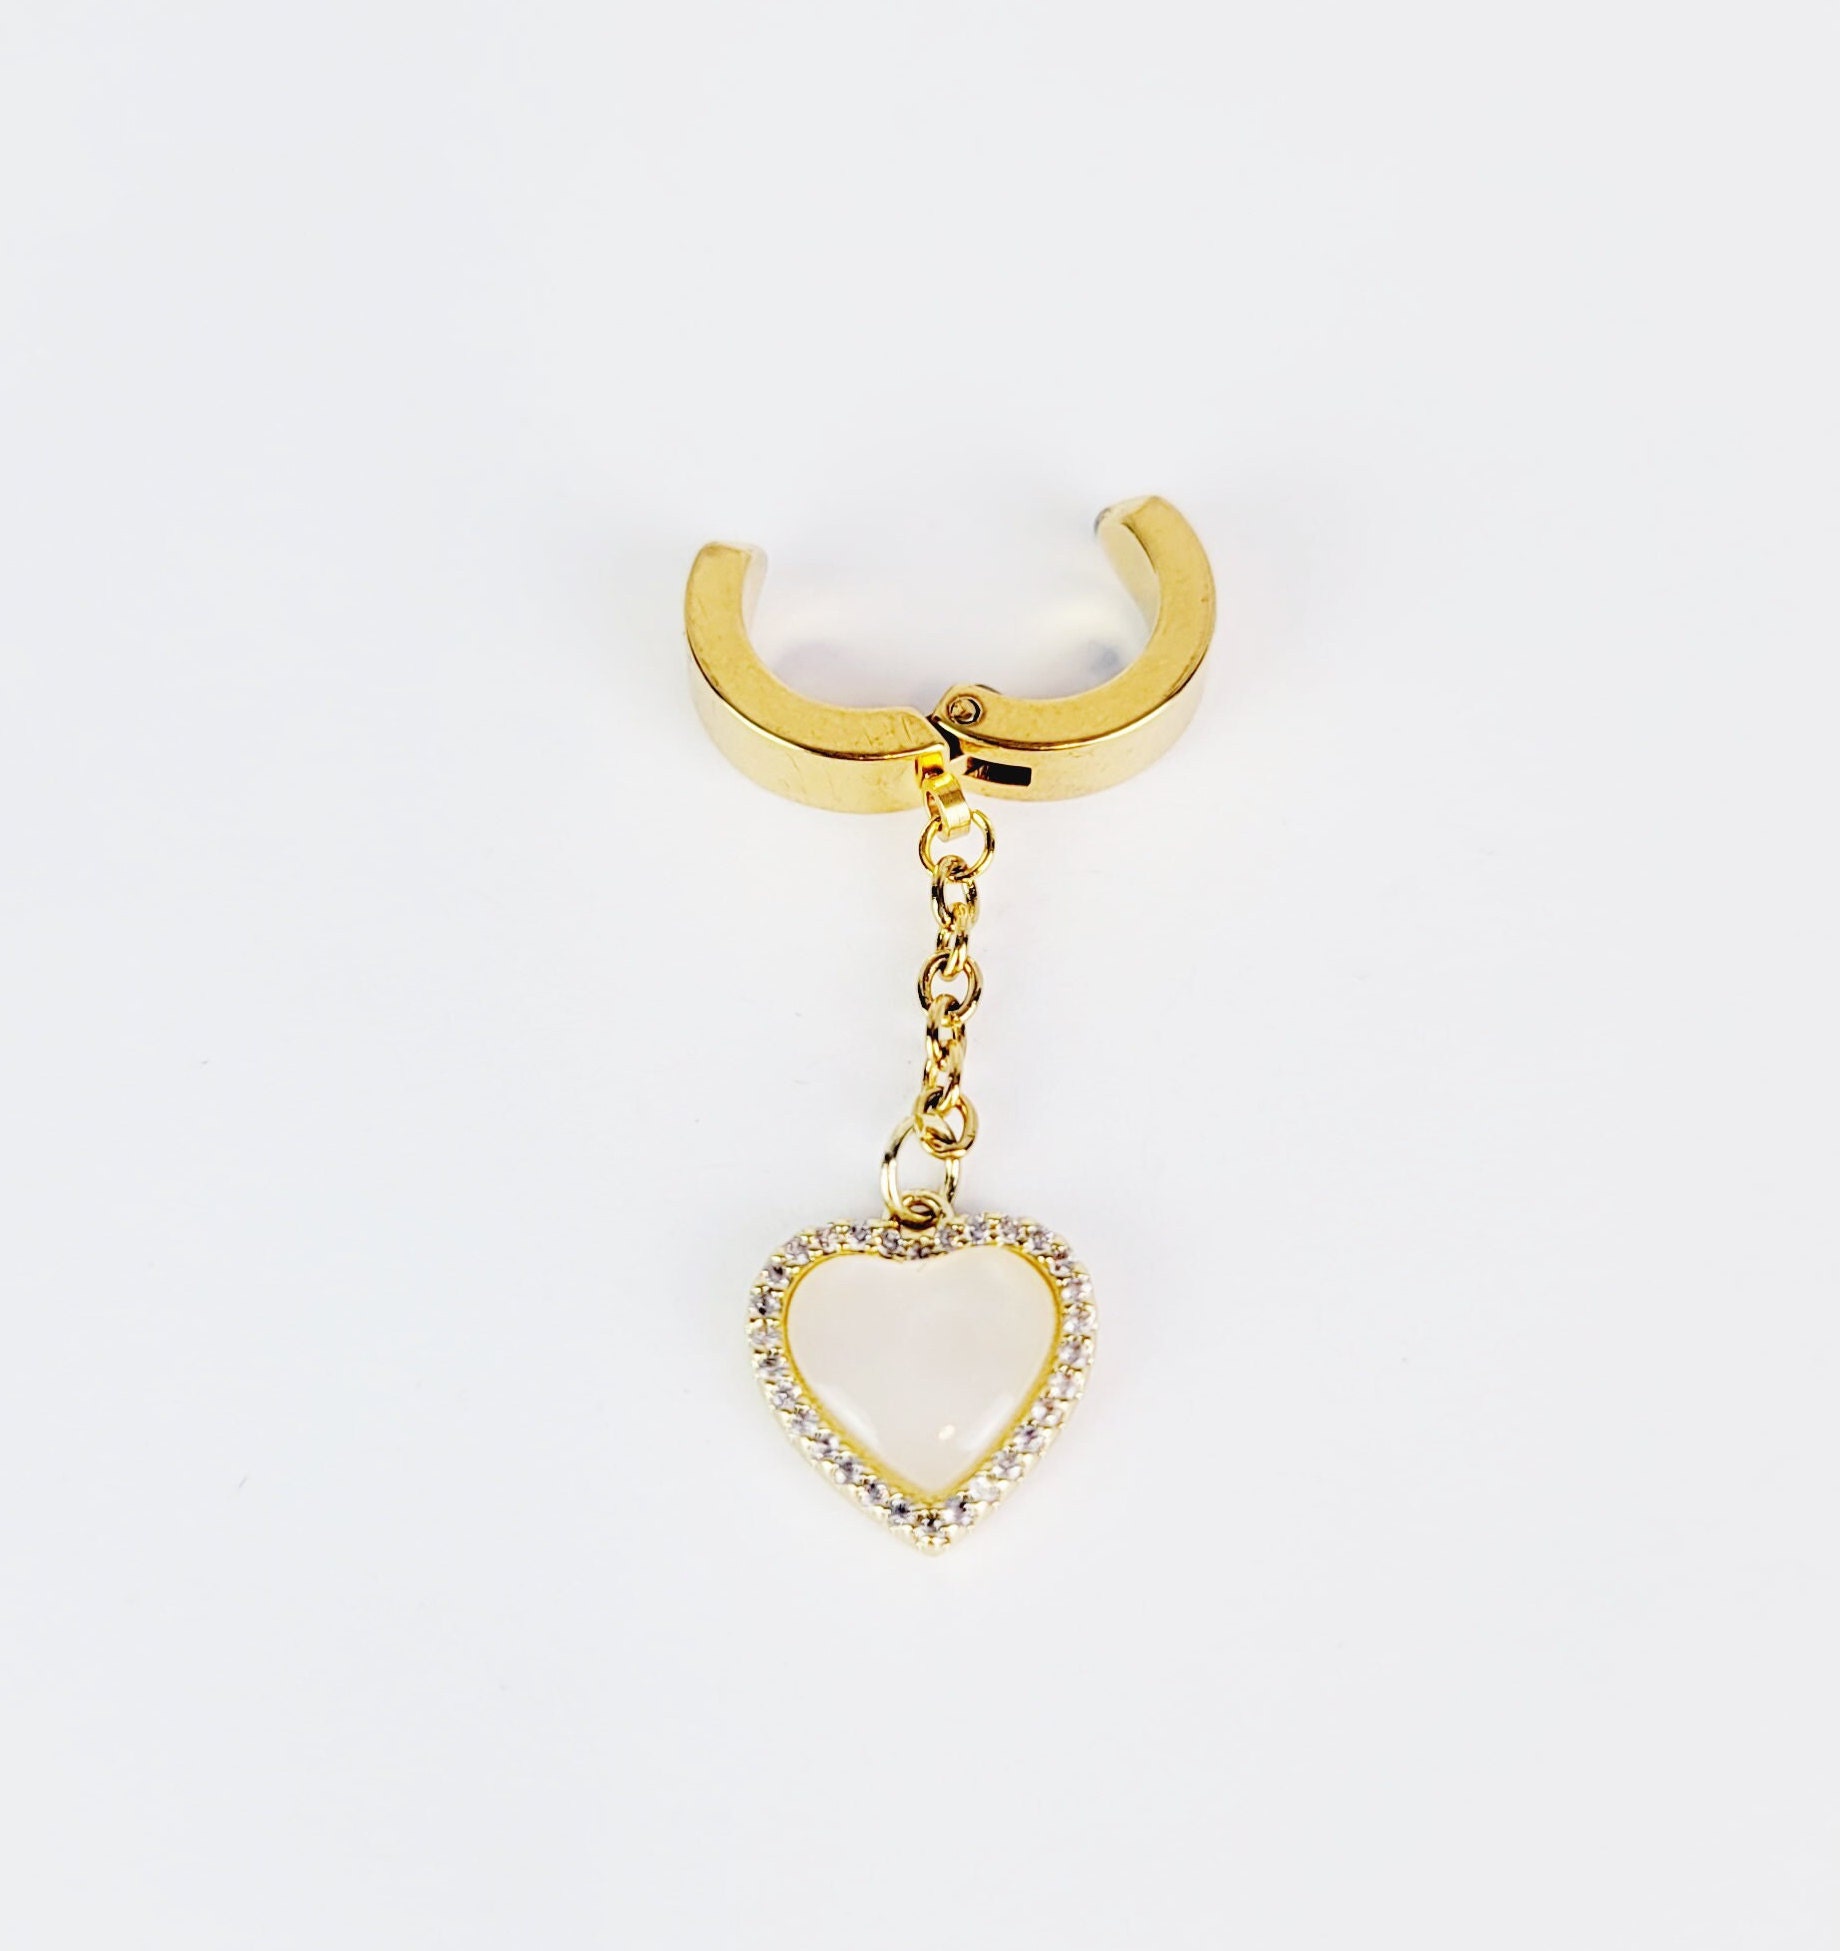 Intimate Jewelry Clip. Non Piercing Gold Stainless Steel Dangling Heart VCH Clip. MATURE photo